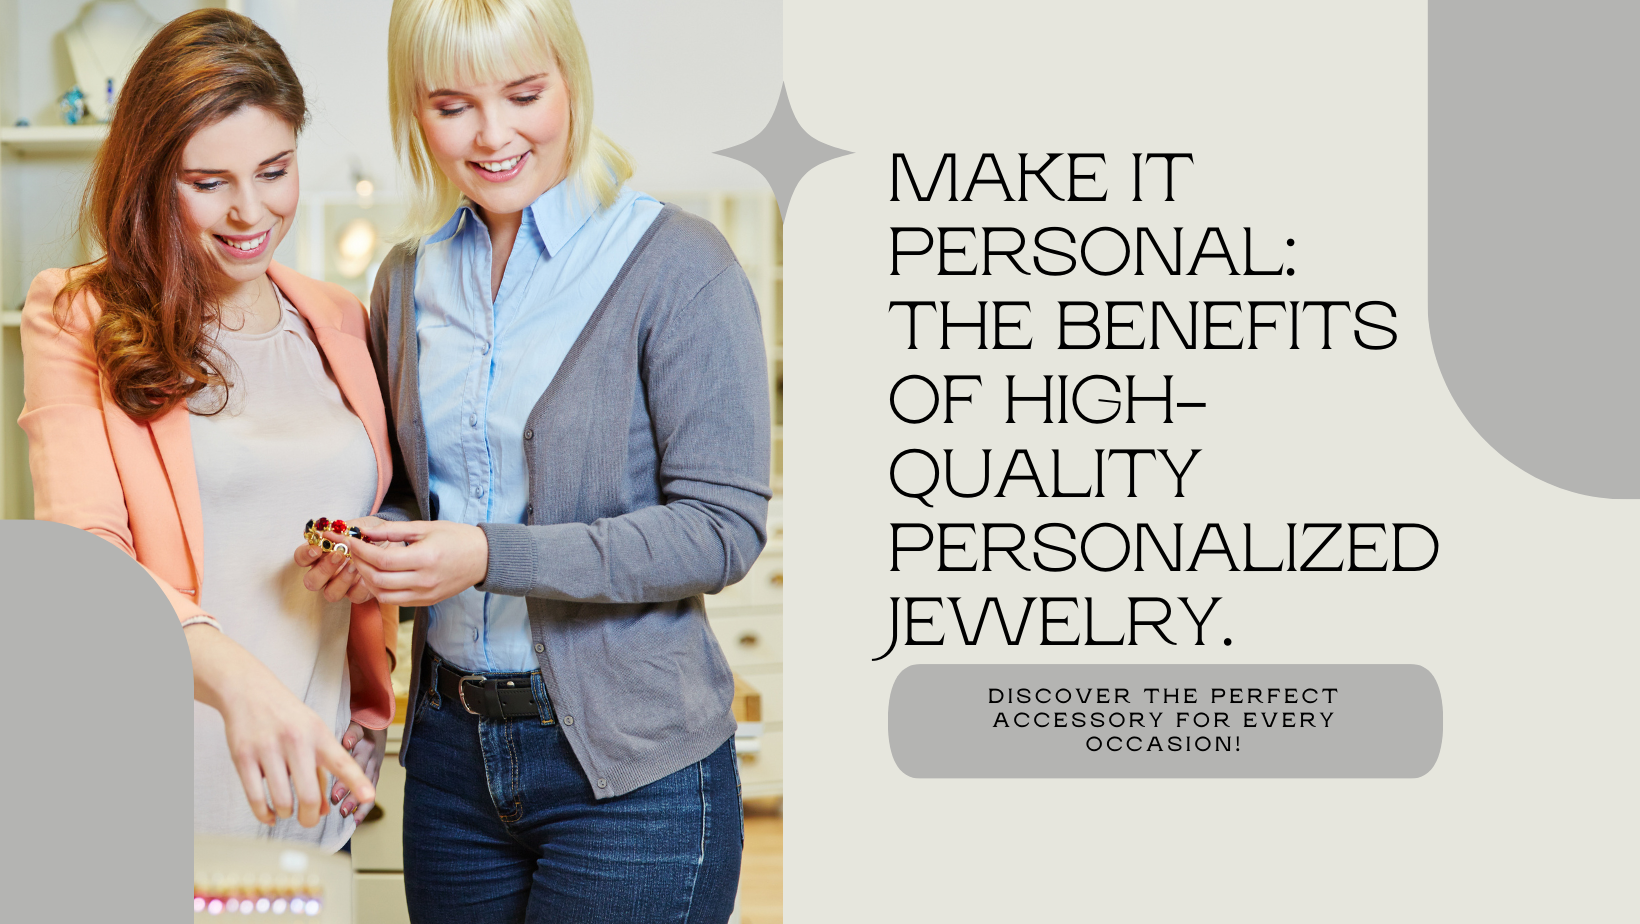 The Benefits of Investing in High-Quality Personalized Jewelry